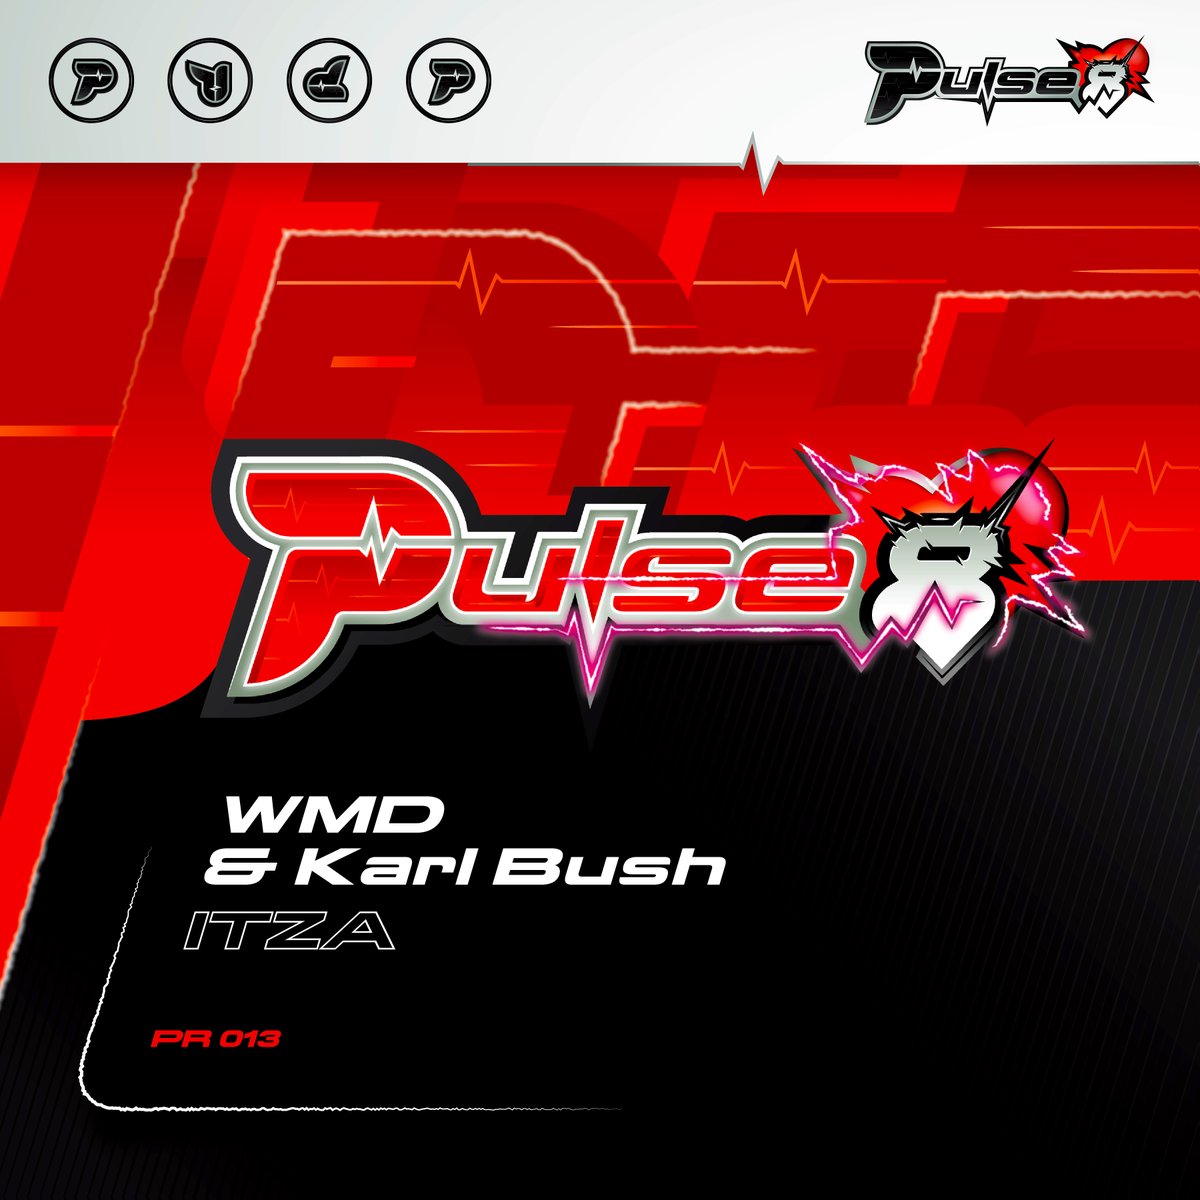 The latest Pulse 8 Records release 'ITZA' from WMD & Karl Bush is out now!

Check it out here along with the label's other releases:
bit.ly/itzapulse8reco…

#hardhouse #harddance #toolboxdigital #newrelease #newmusic #pulse8records